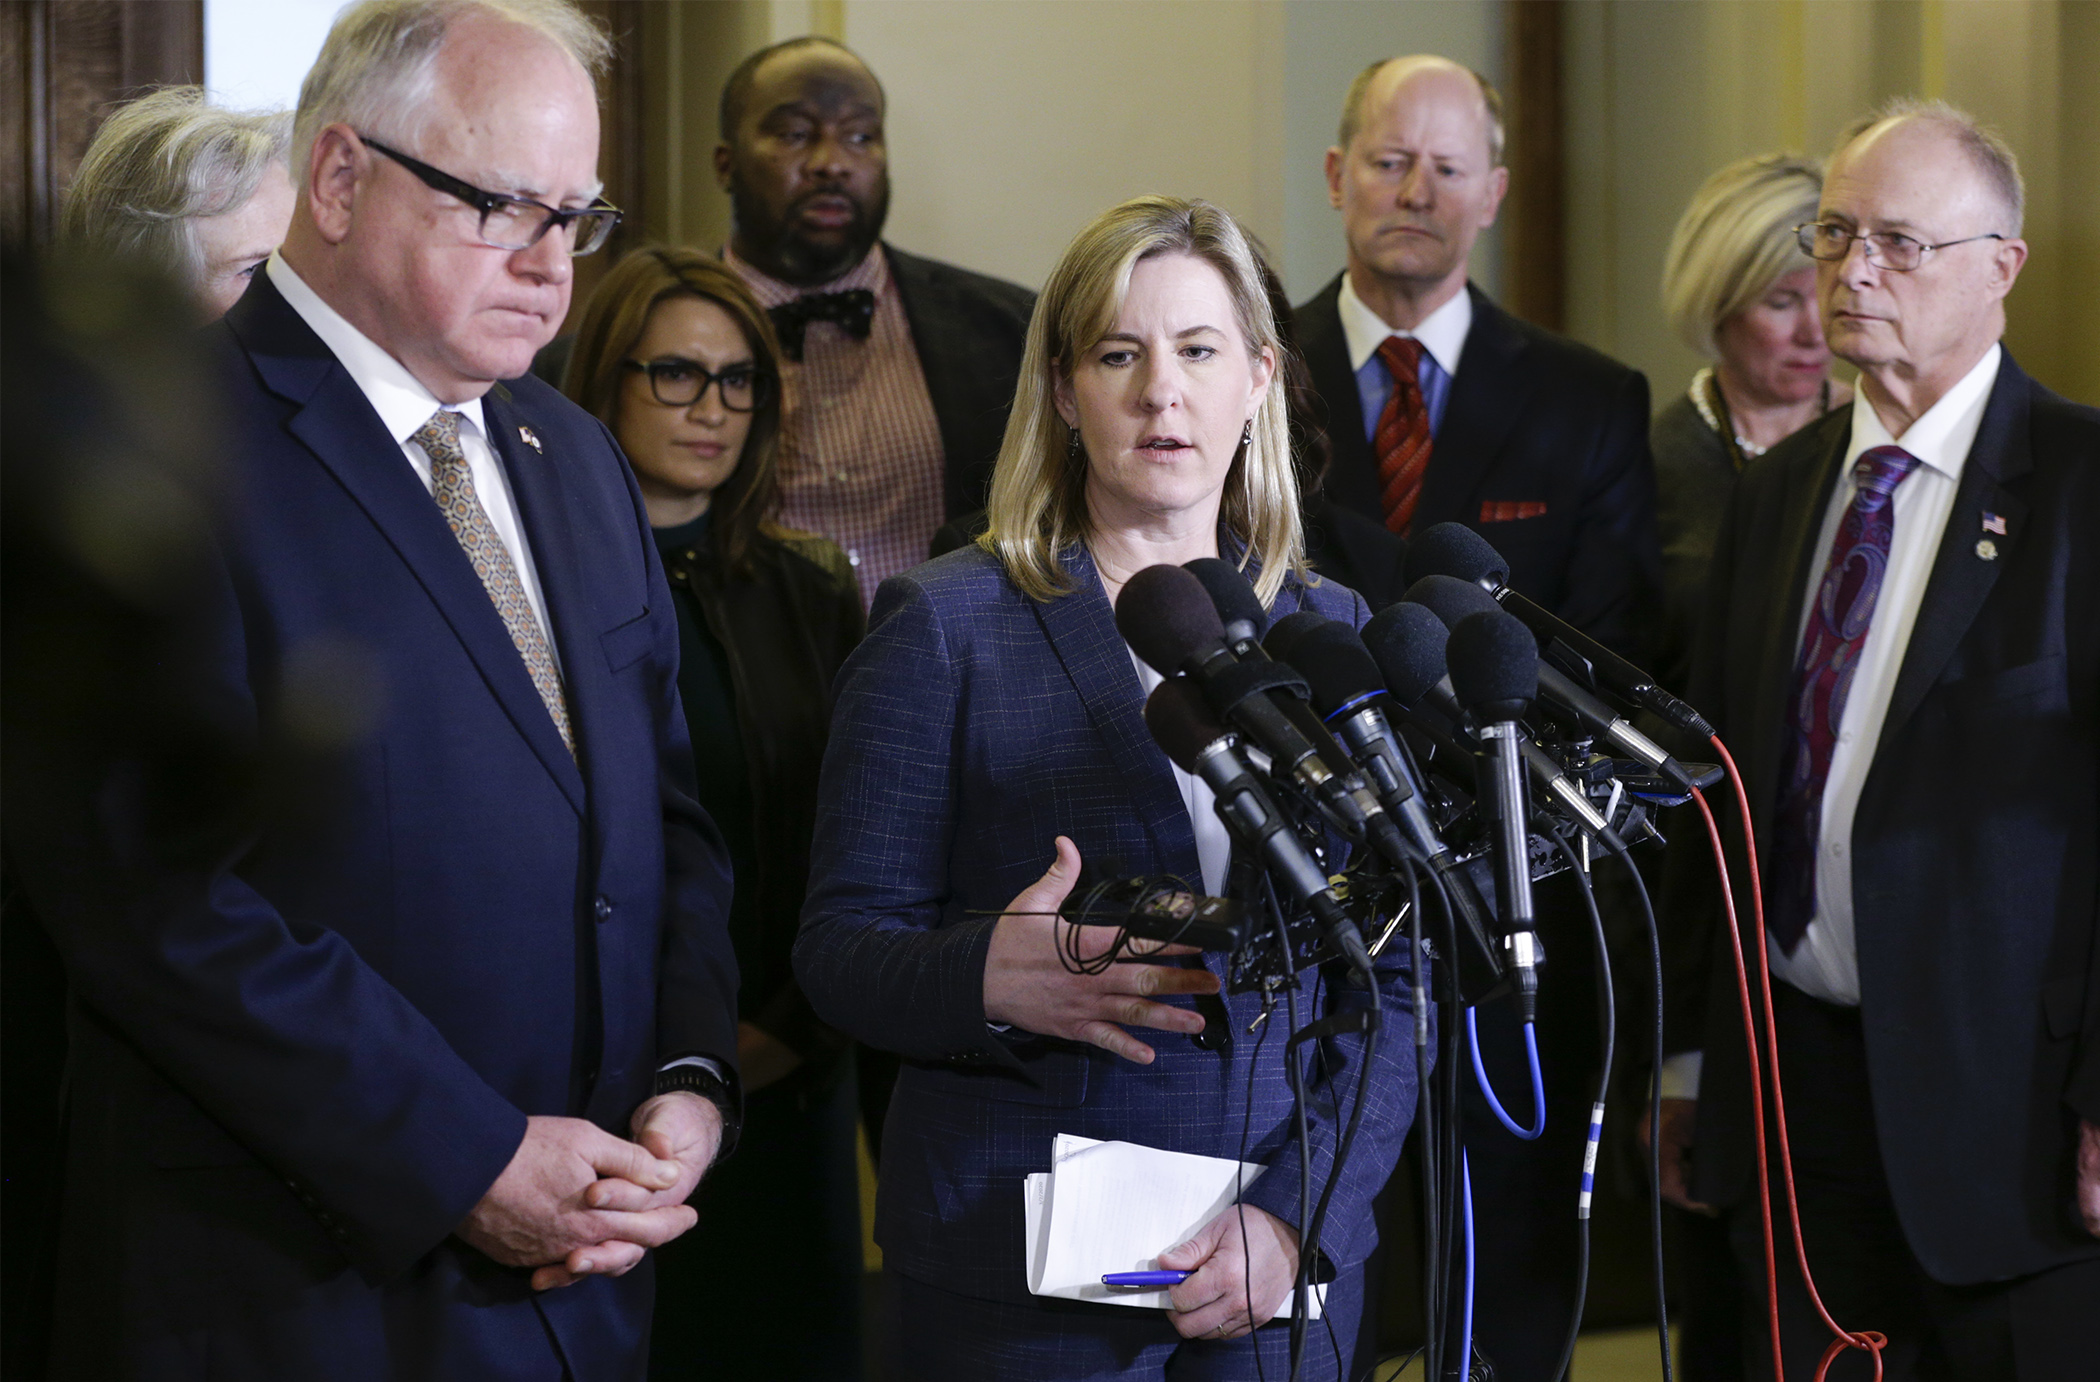 House Speaker Melissa Hortman discusses the state's preparations for the potential spread of the COVID-19 virus to Minnesota. Gov. Tim Walz, state health officials and other legislative leaders spoke at the March 2 news conference. Photo by Paul Battaglia